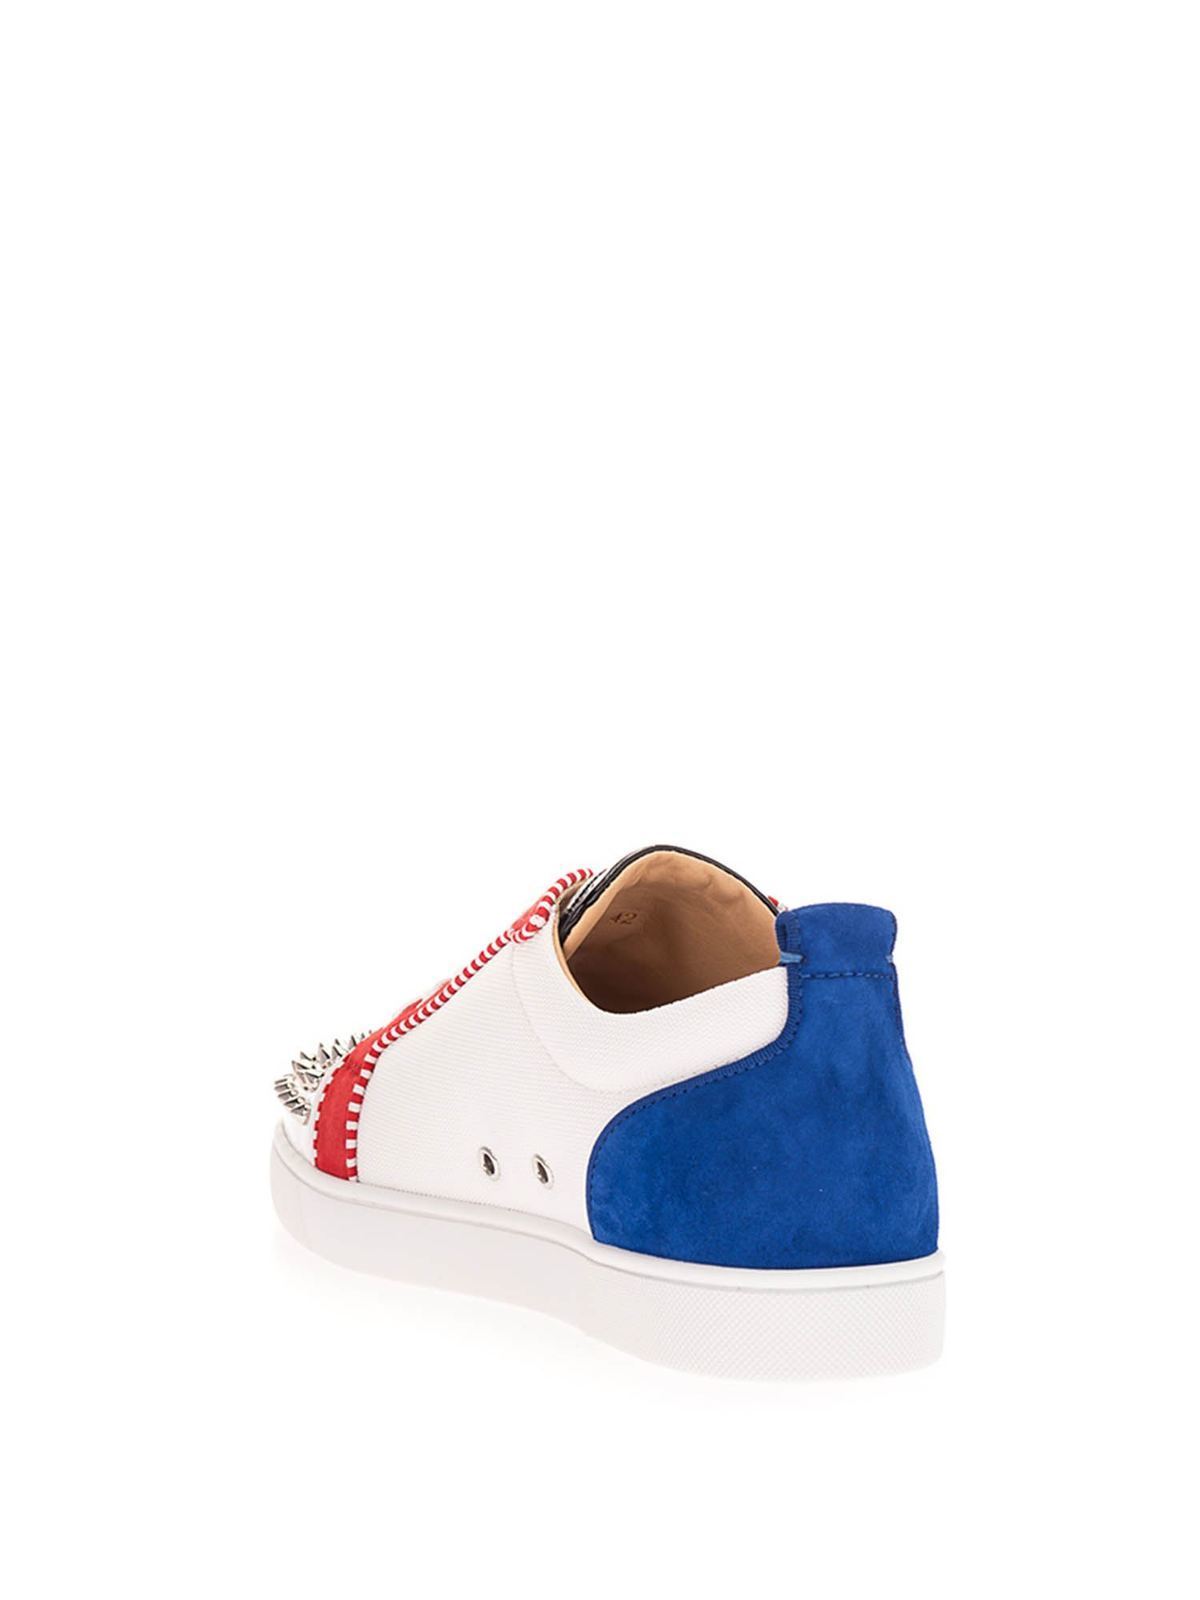 Lou Spikes Orlato Sneakers in Blue - Christian Louboutin